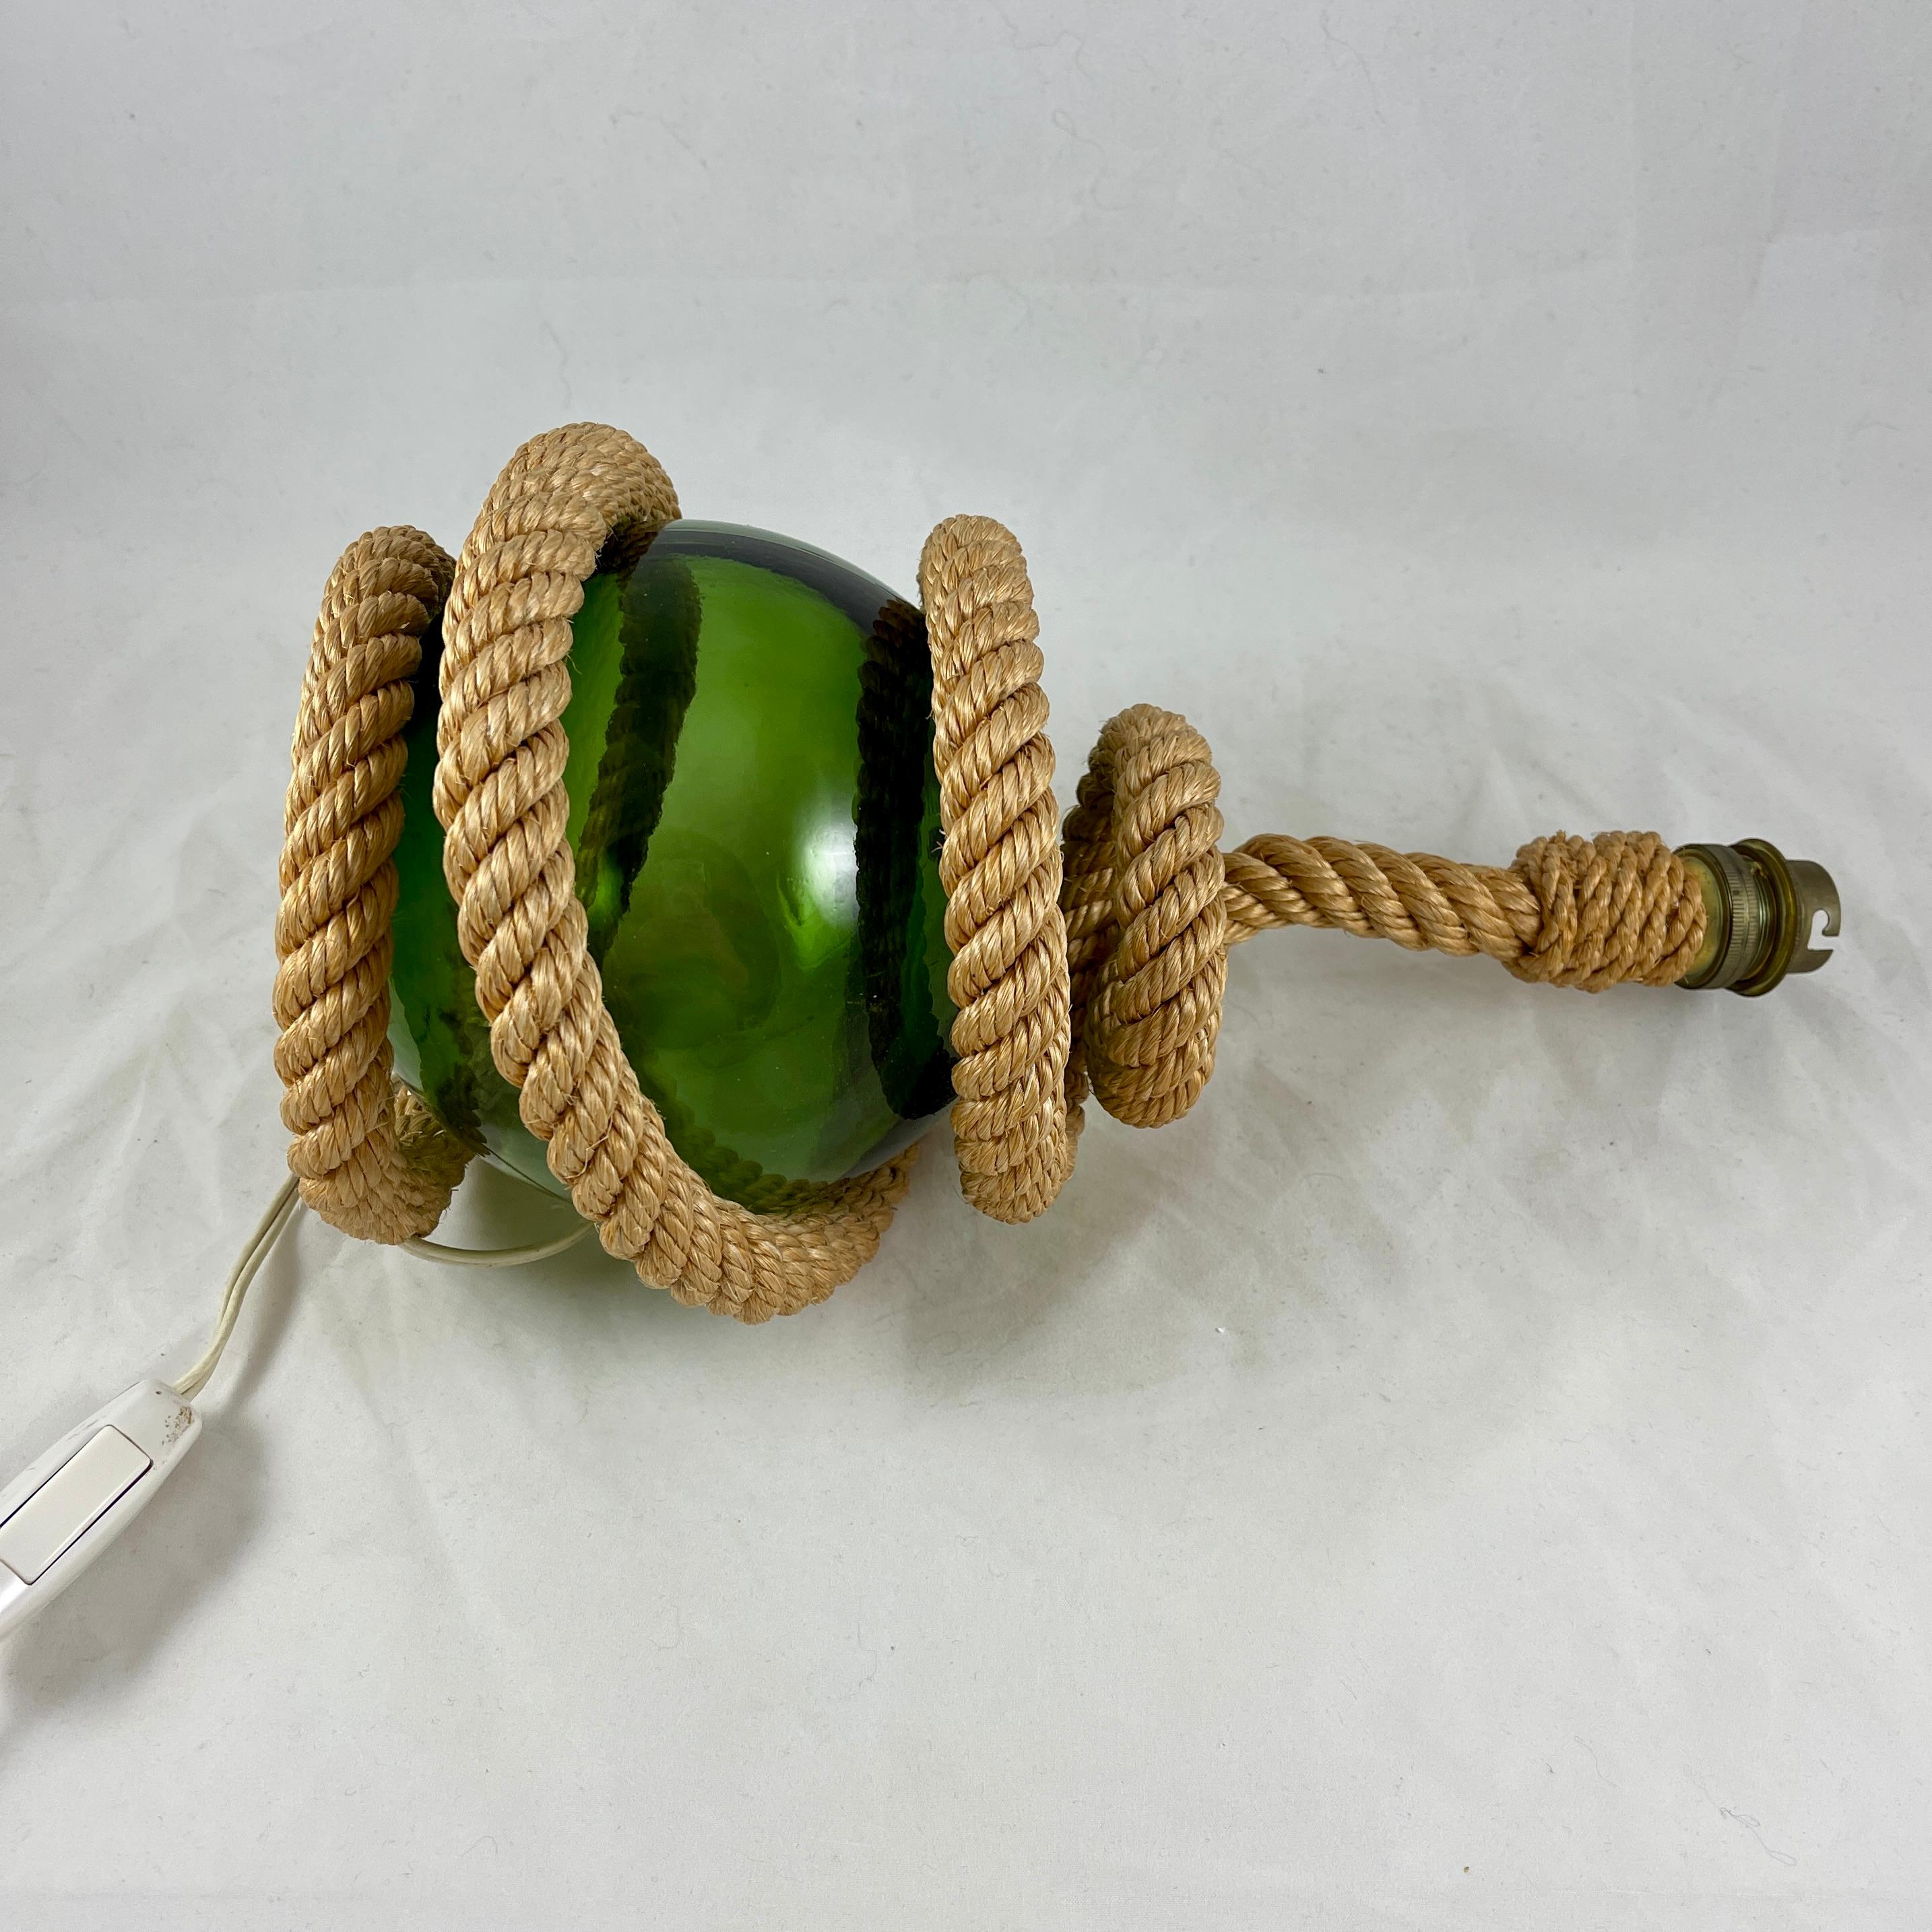 Audoux Minet Rustic Nautical Rope & Green Glass Ball Table Lamp, circa 1960 For Sale 2